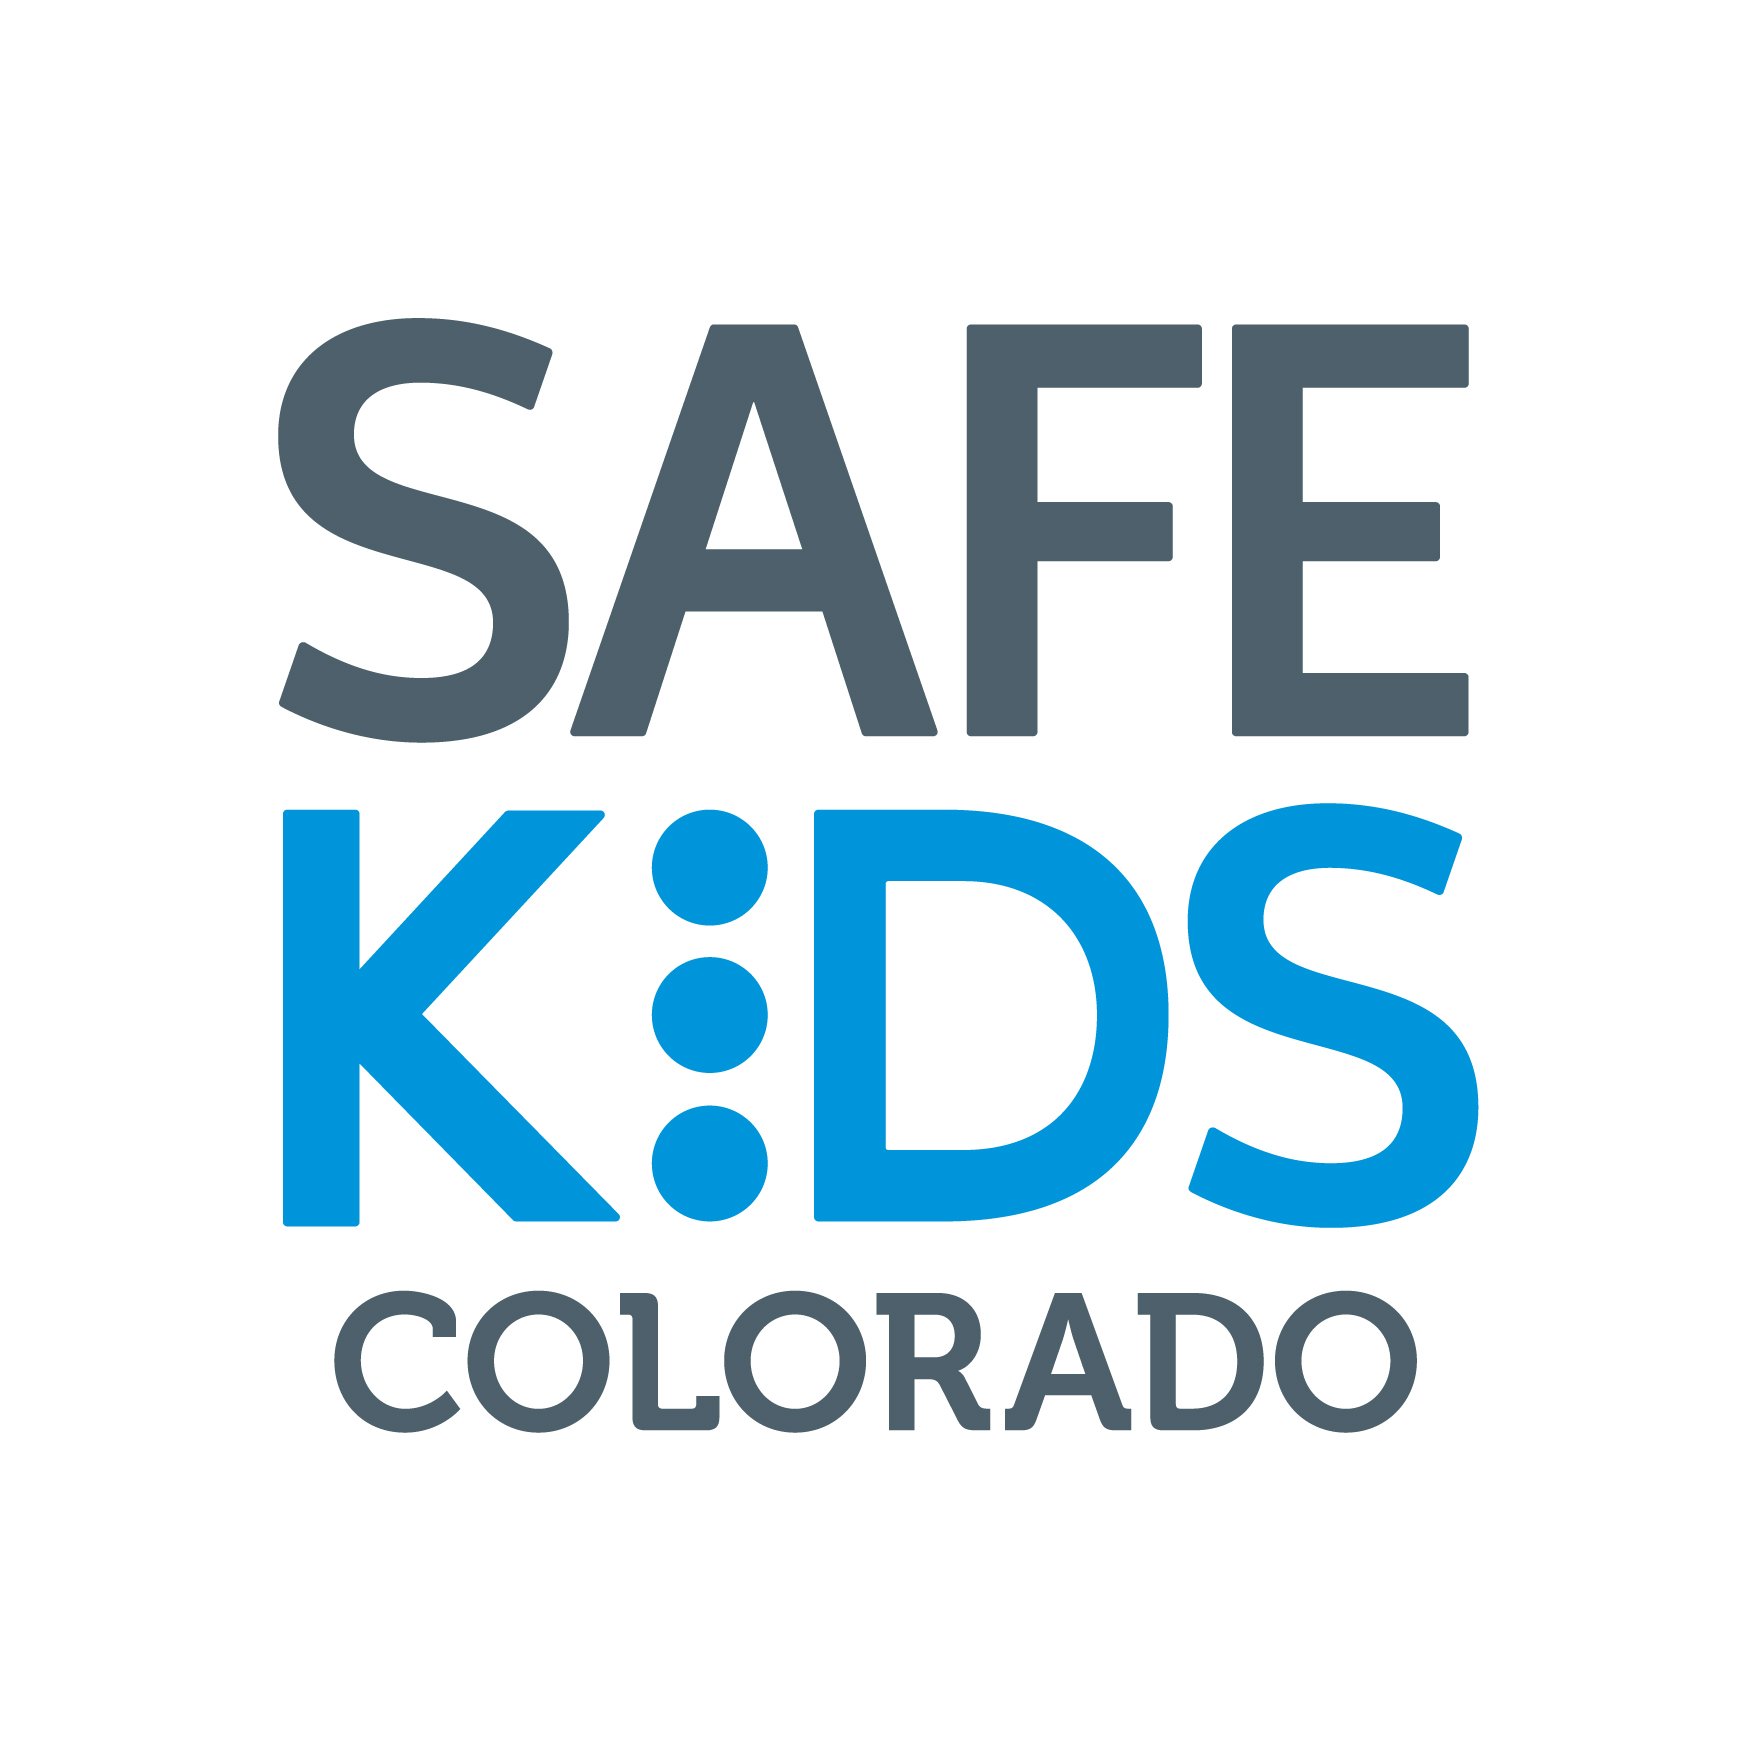 Safe Kids Colorado works to protect Colorado kids on the move, at home and at play.